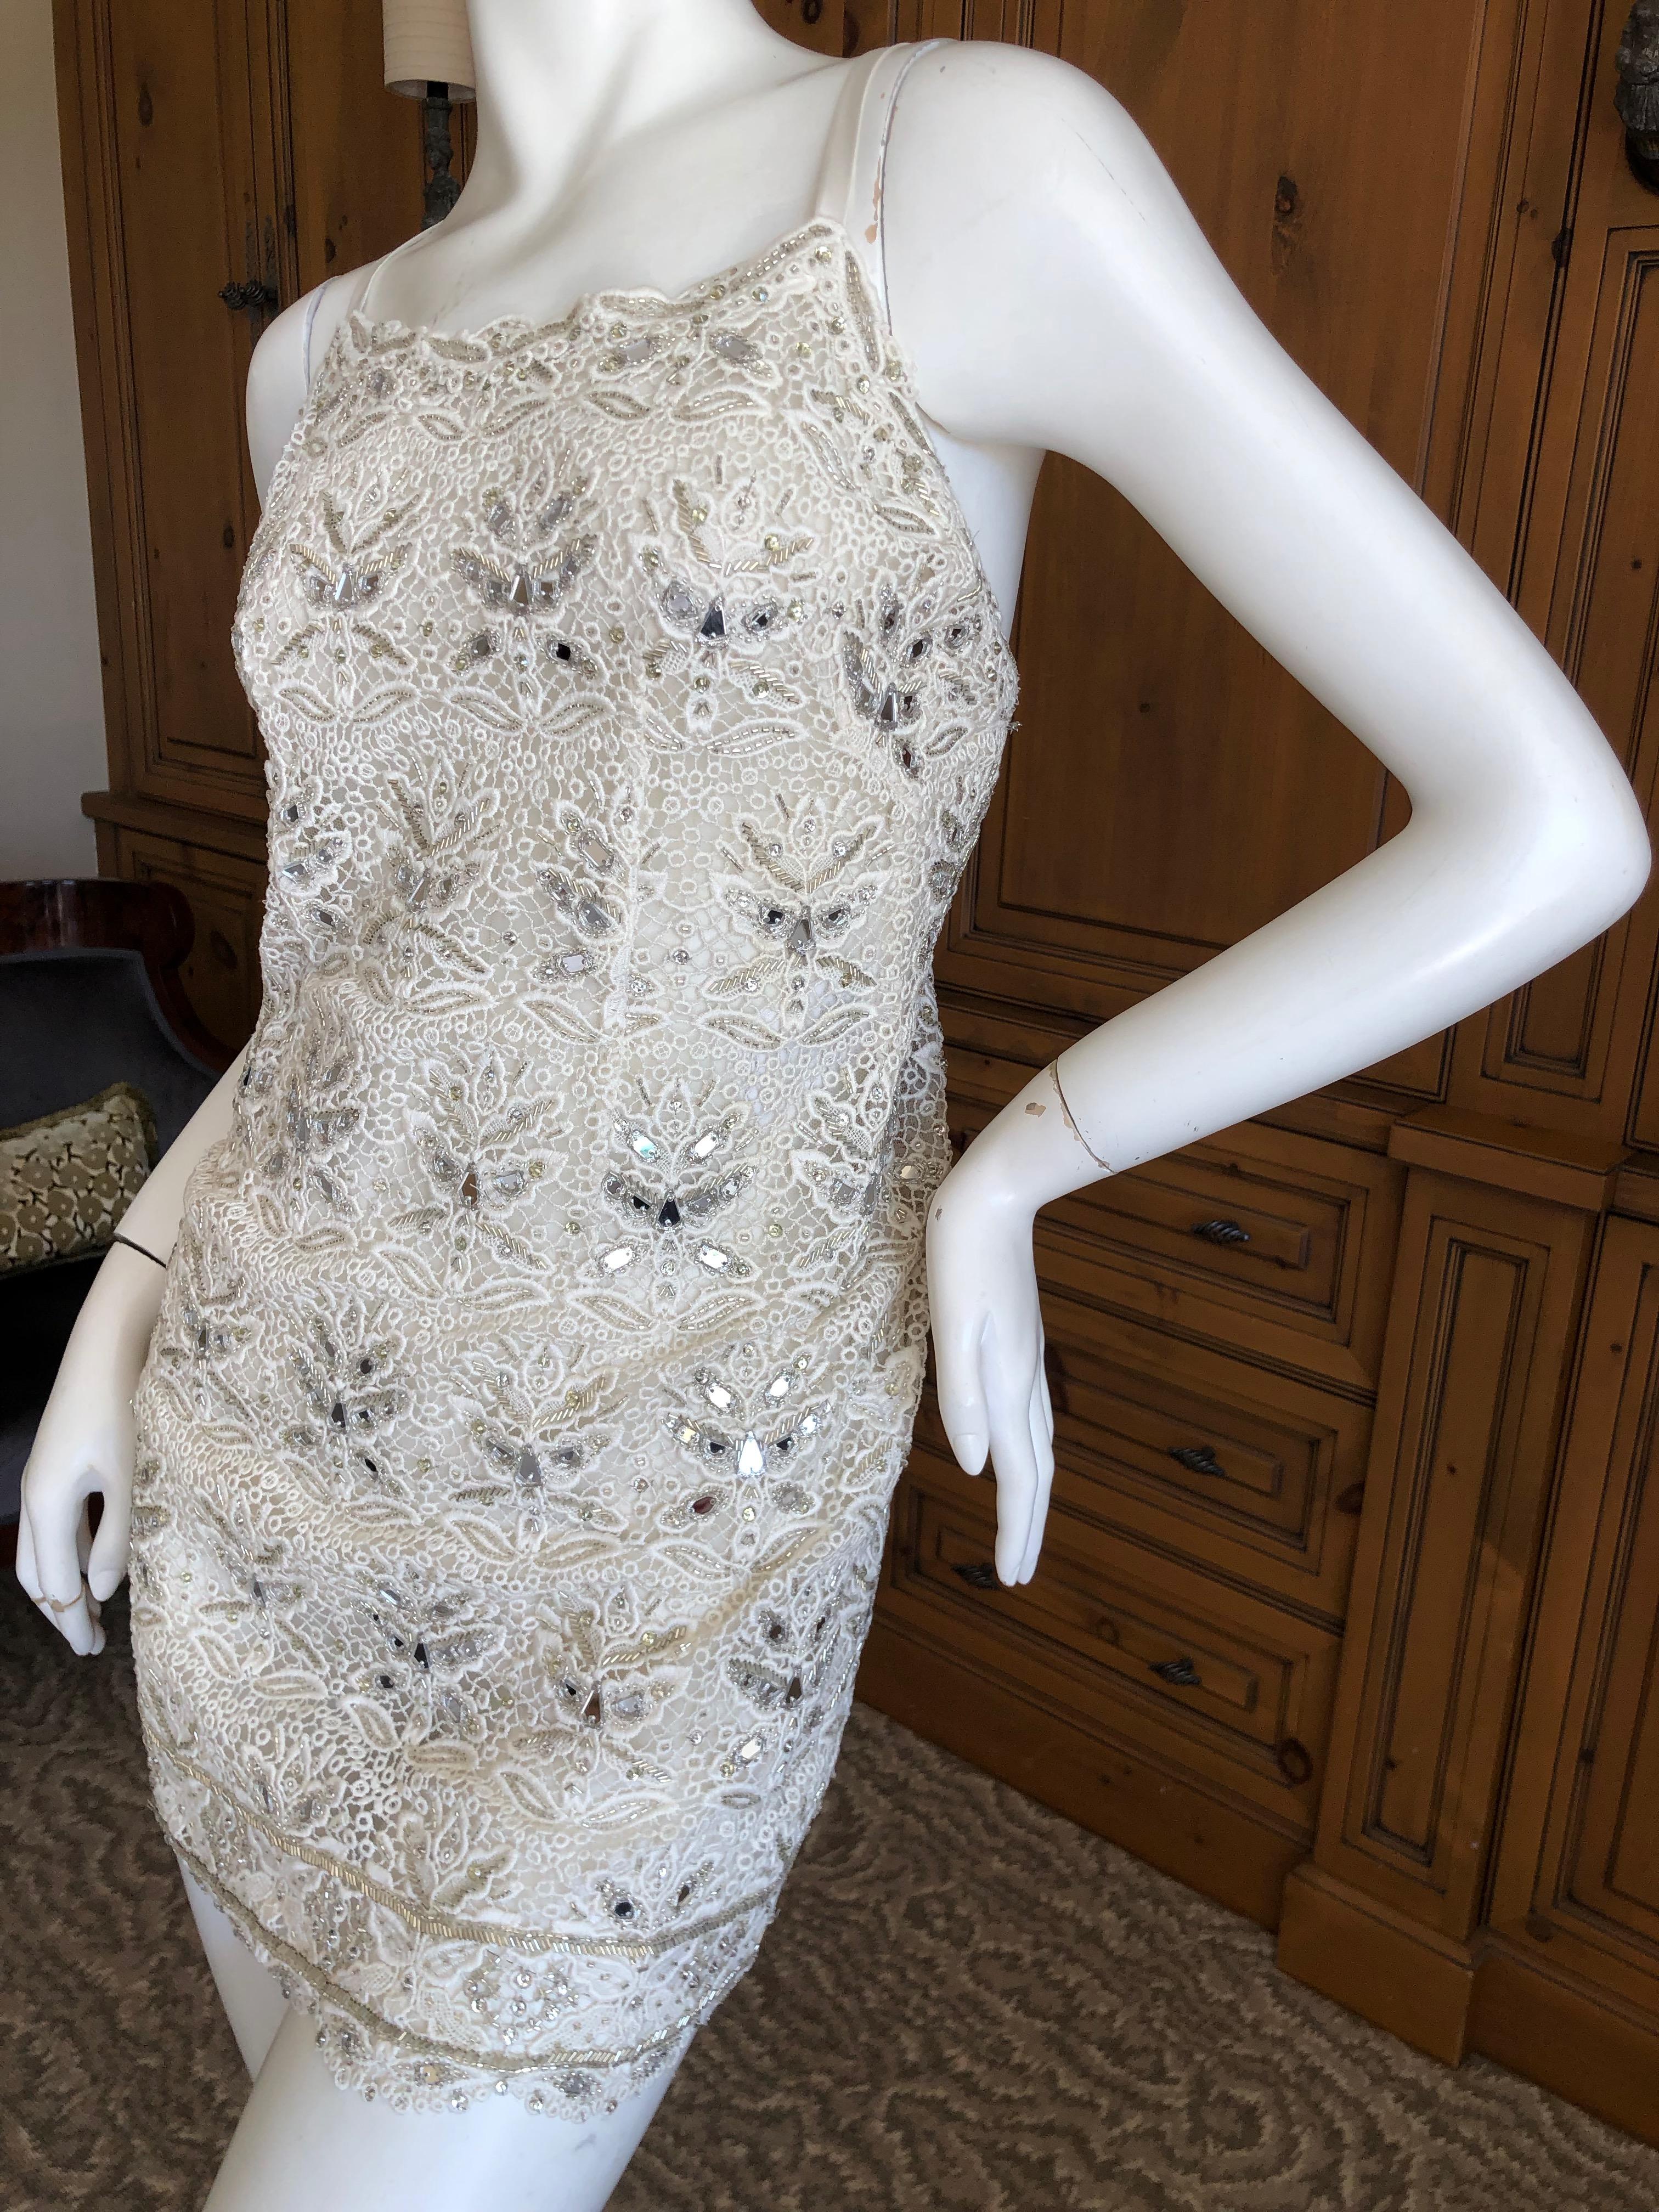 Emilio Pucci White Lace Micro Mini Dress with Mirror and Bead Embellishment
WOW , this is so fun. Please use zoom to see the details.
Size 34 FR 4 US
Bust  35